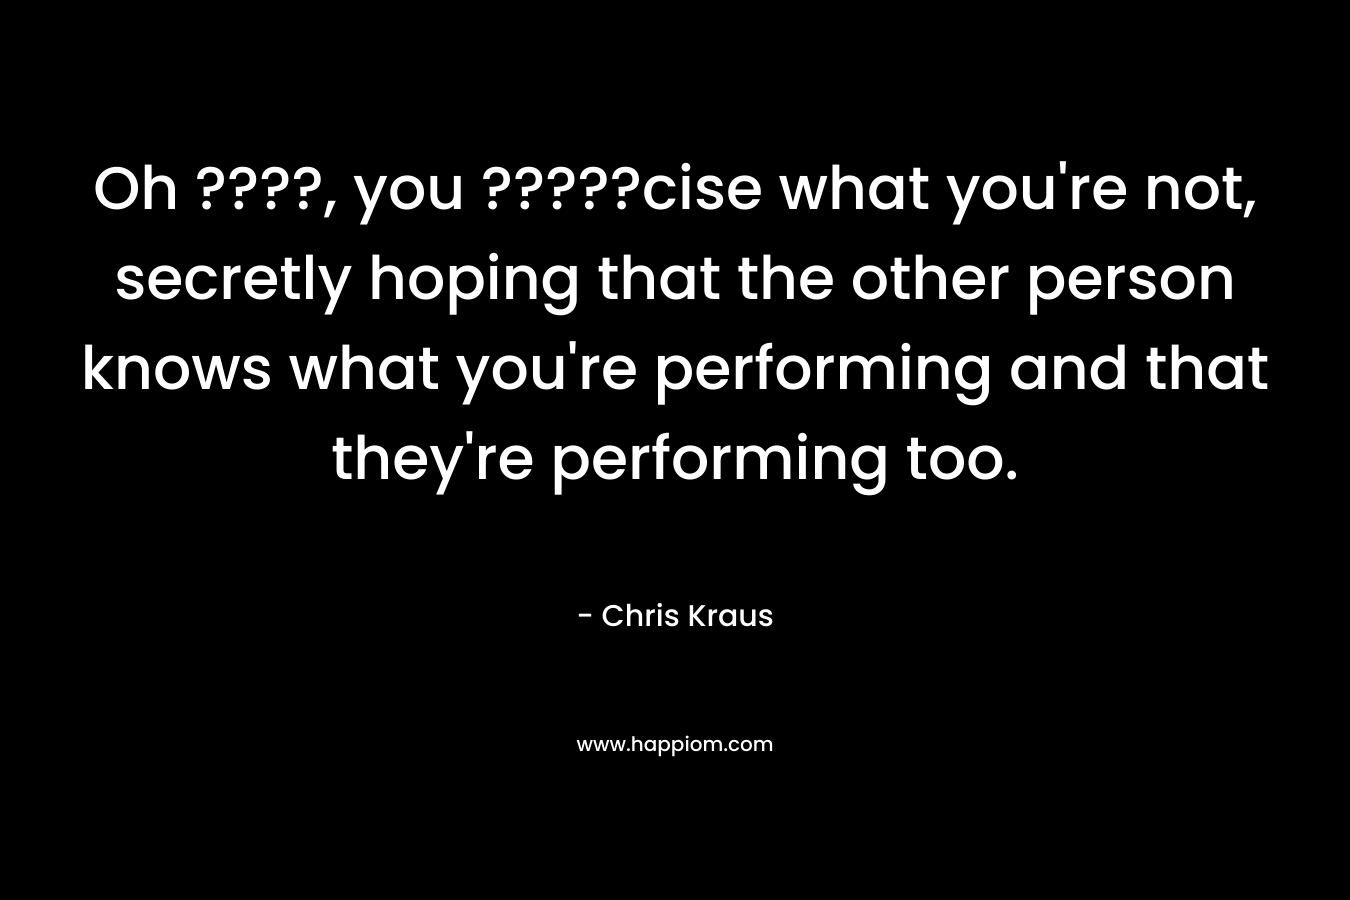 Oh ????, you ?????cise what you’re not, secretly hoping that the other person knows what you’re performing and that they’re performing too. – Chris Kraus